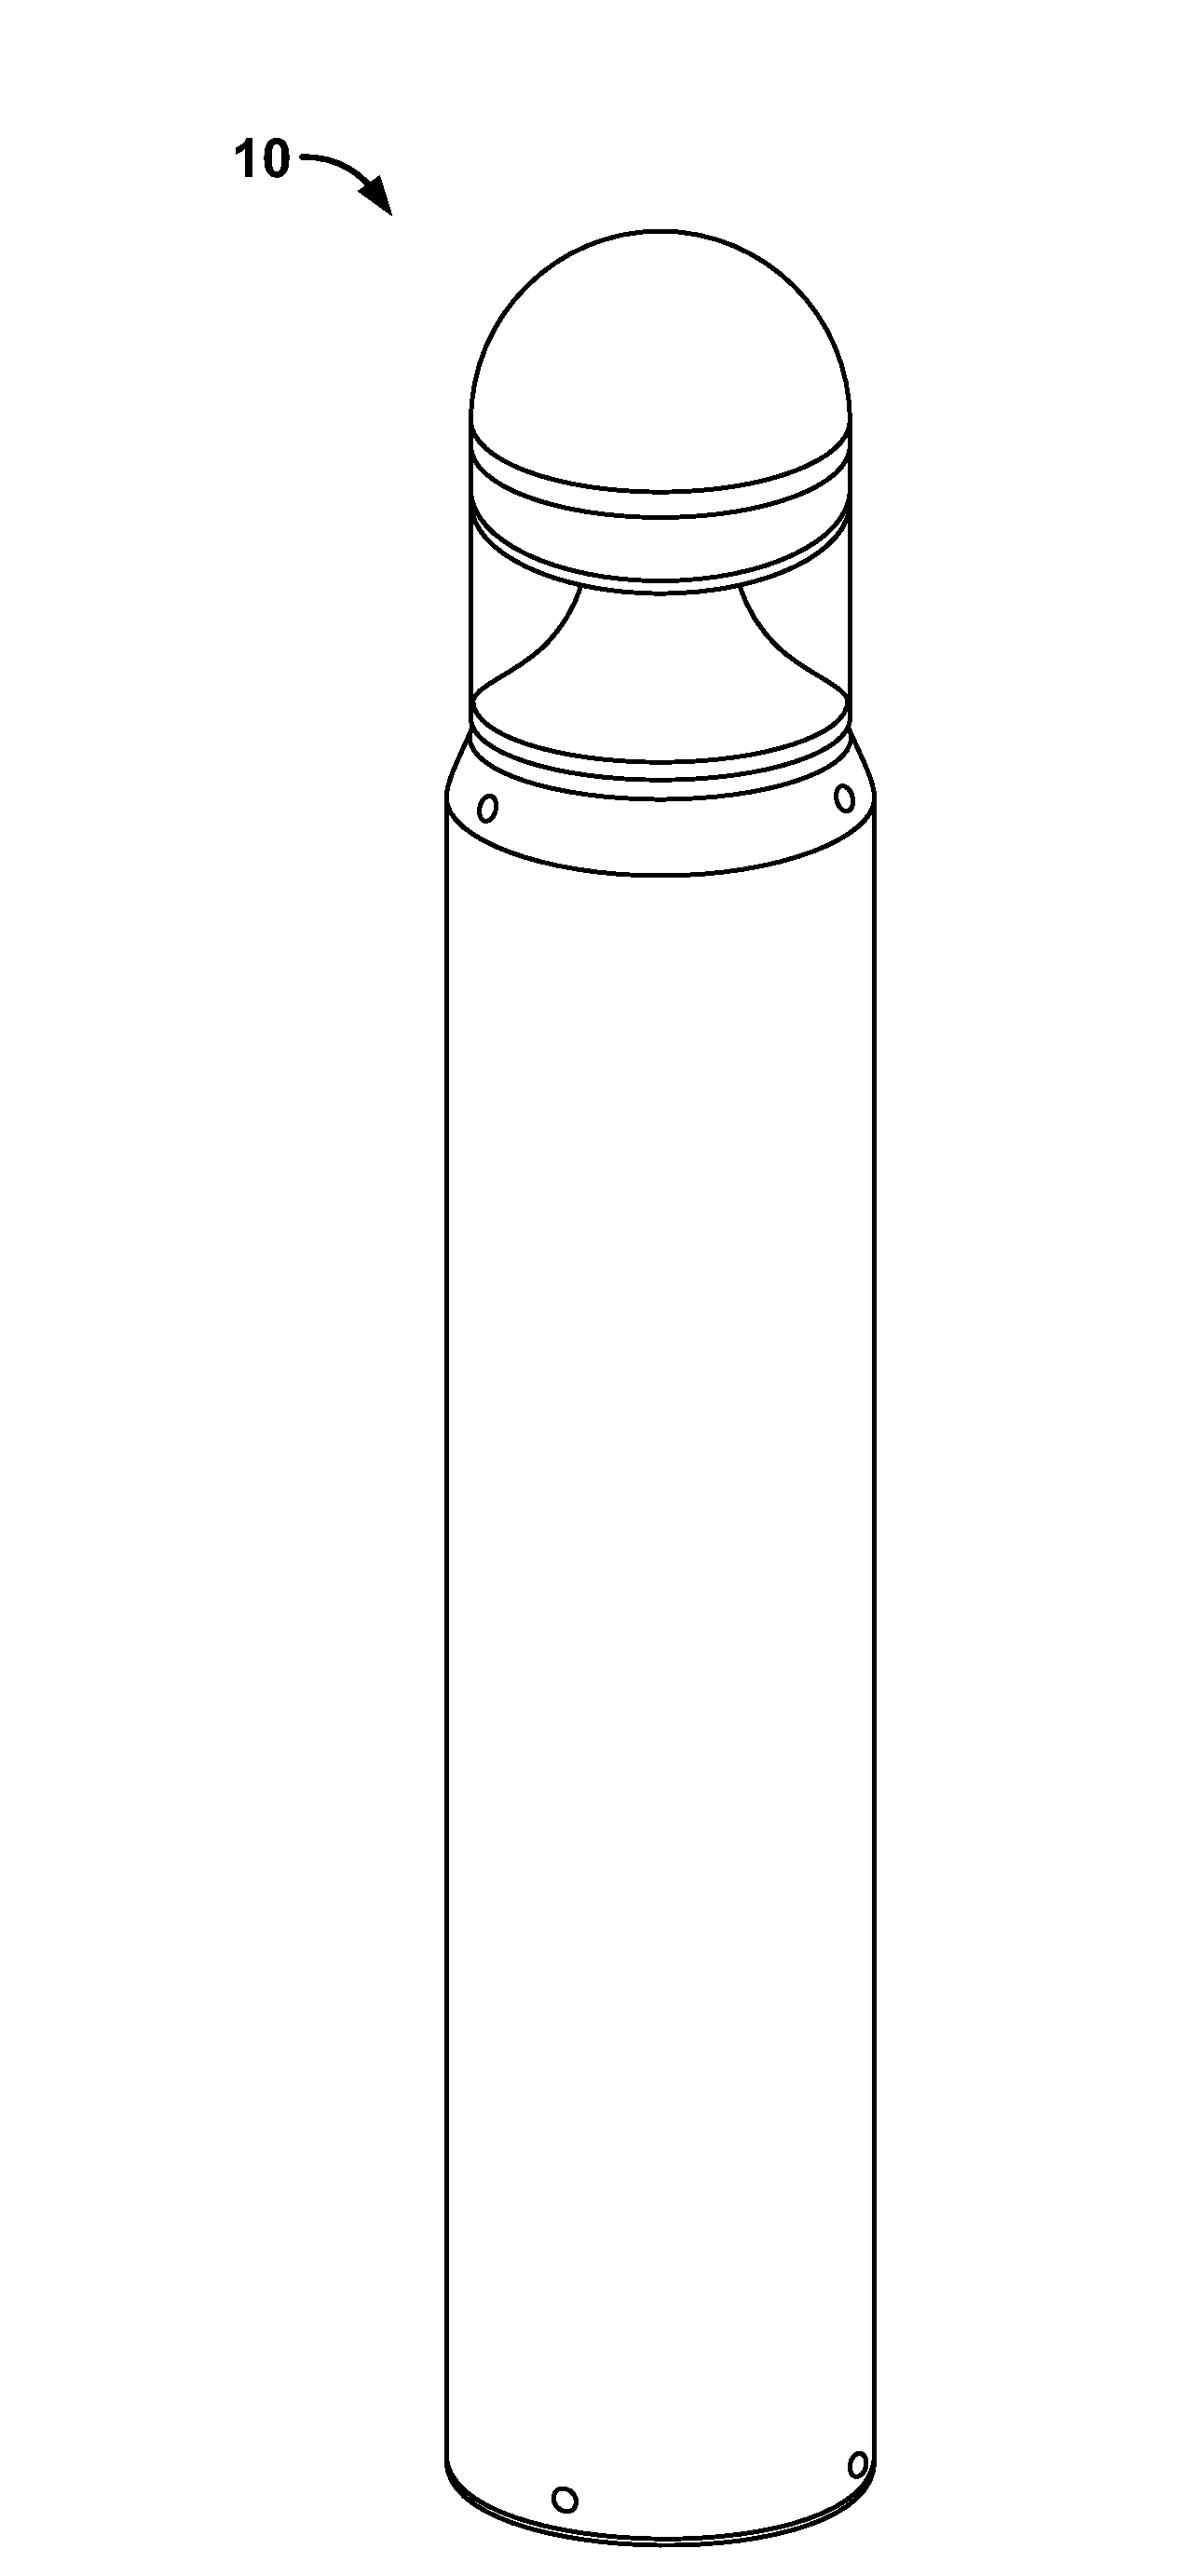 Bollard light with internal compression support system